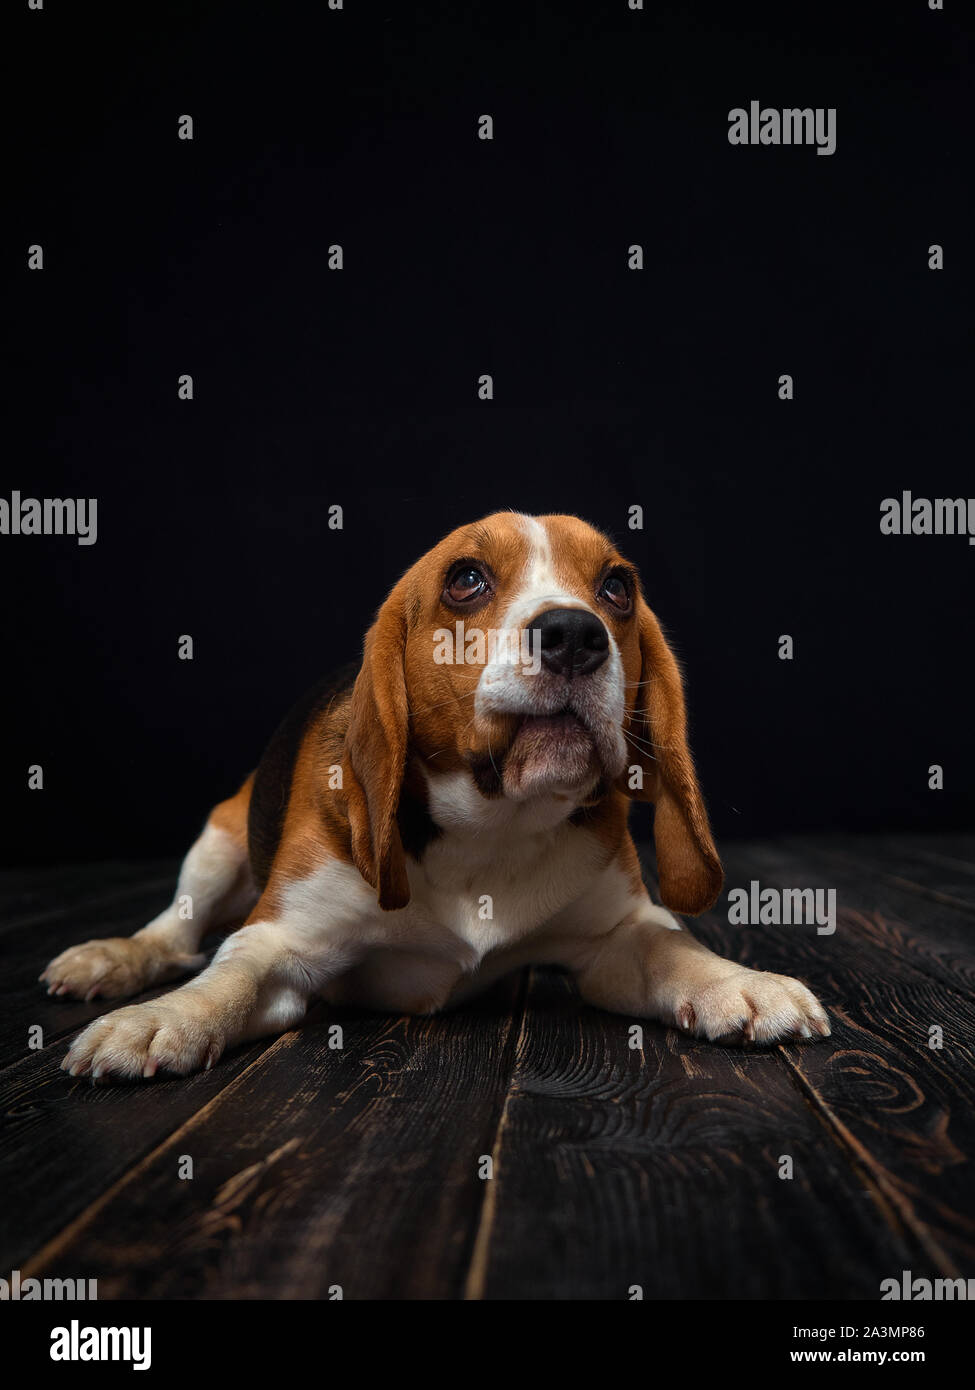 Beagle dog portrait shot in photo studio on black background and wooden floor.The dog made a grimace. Stock Photo